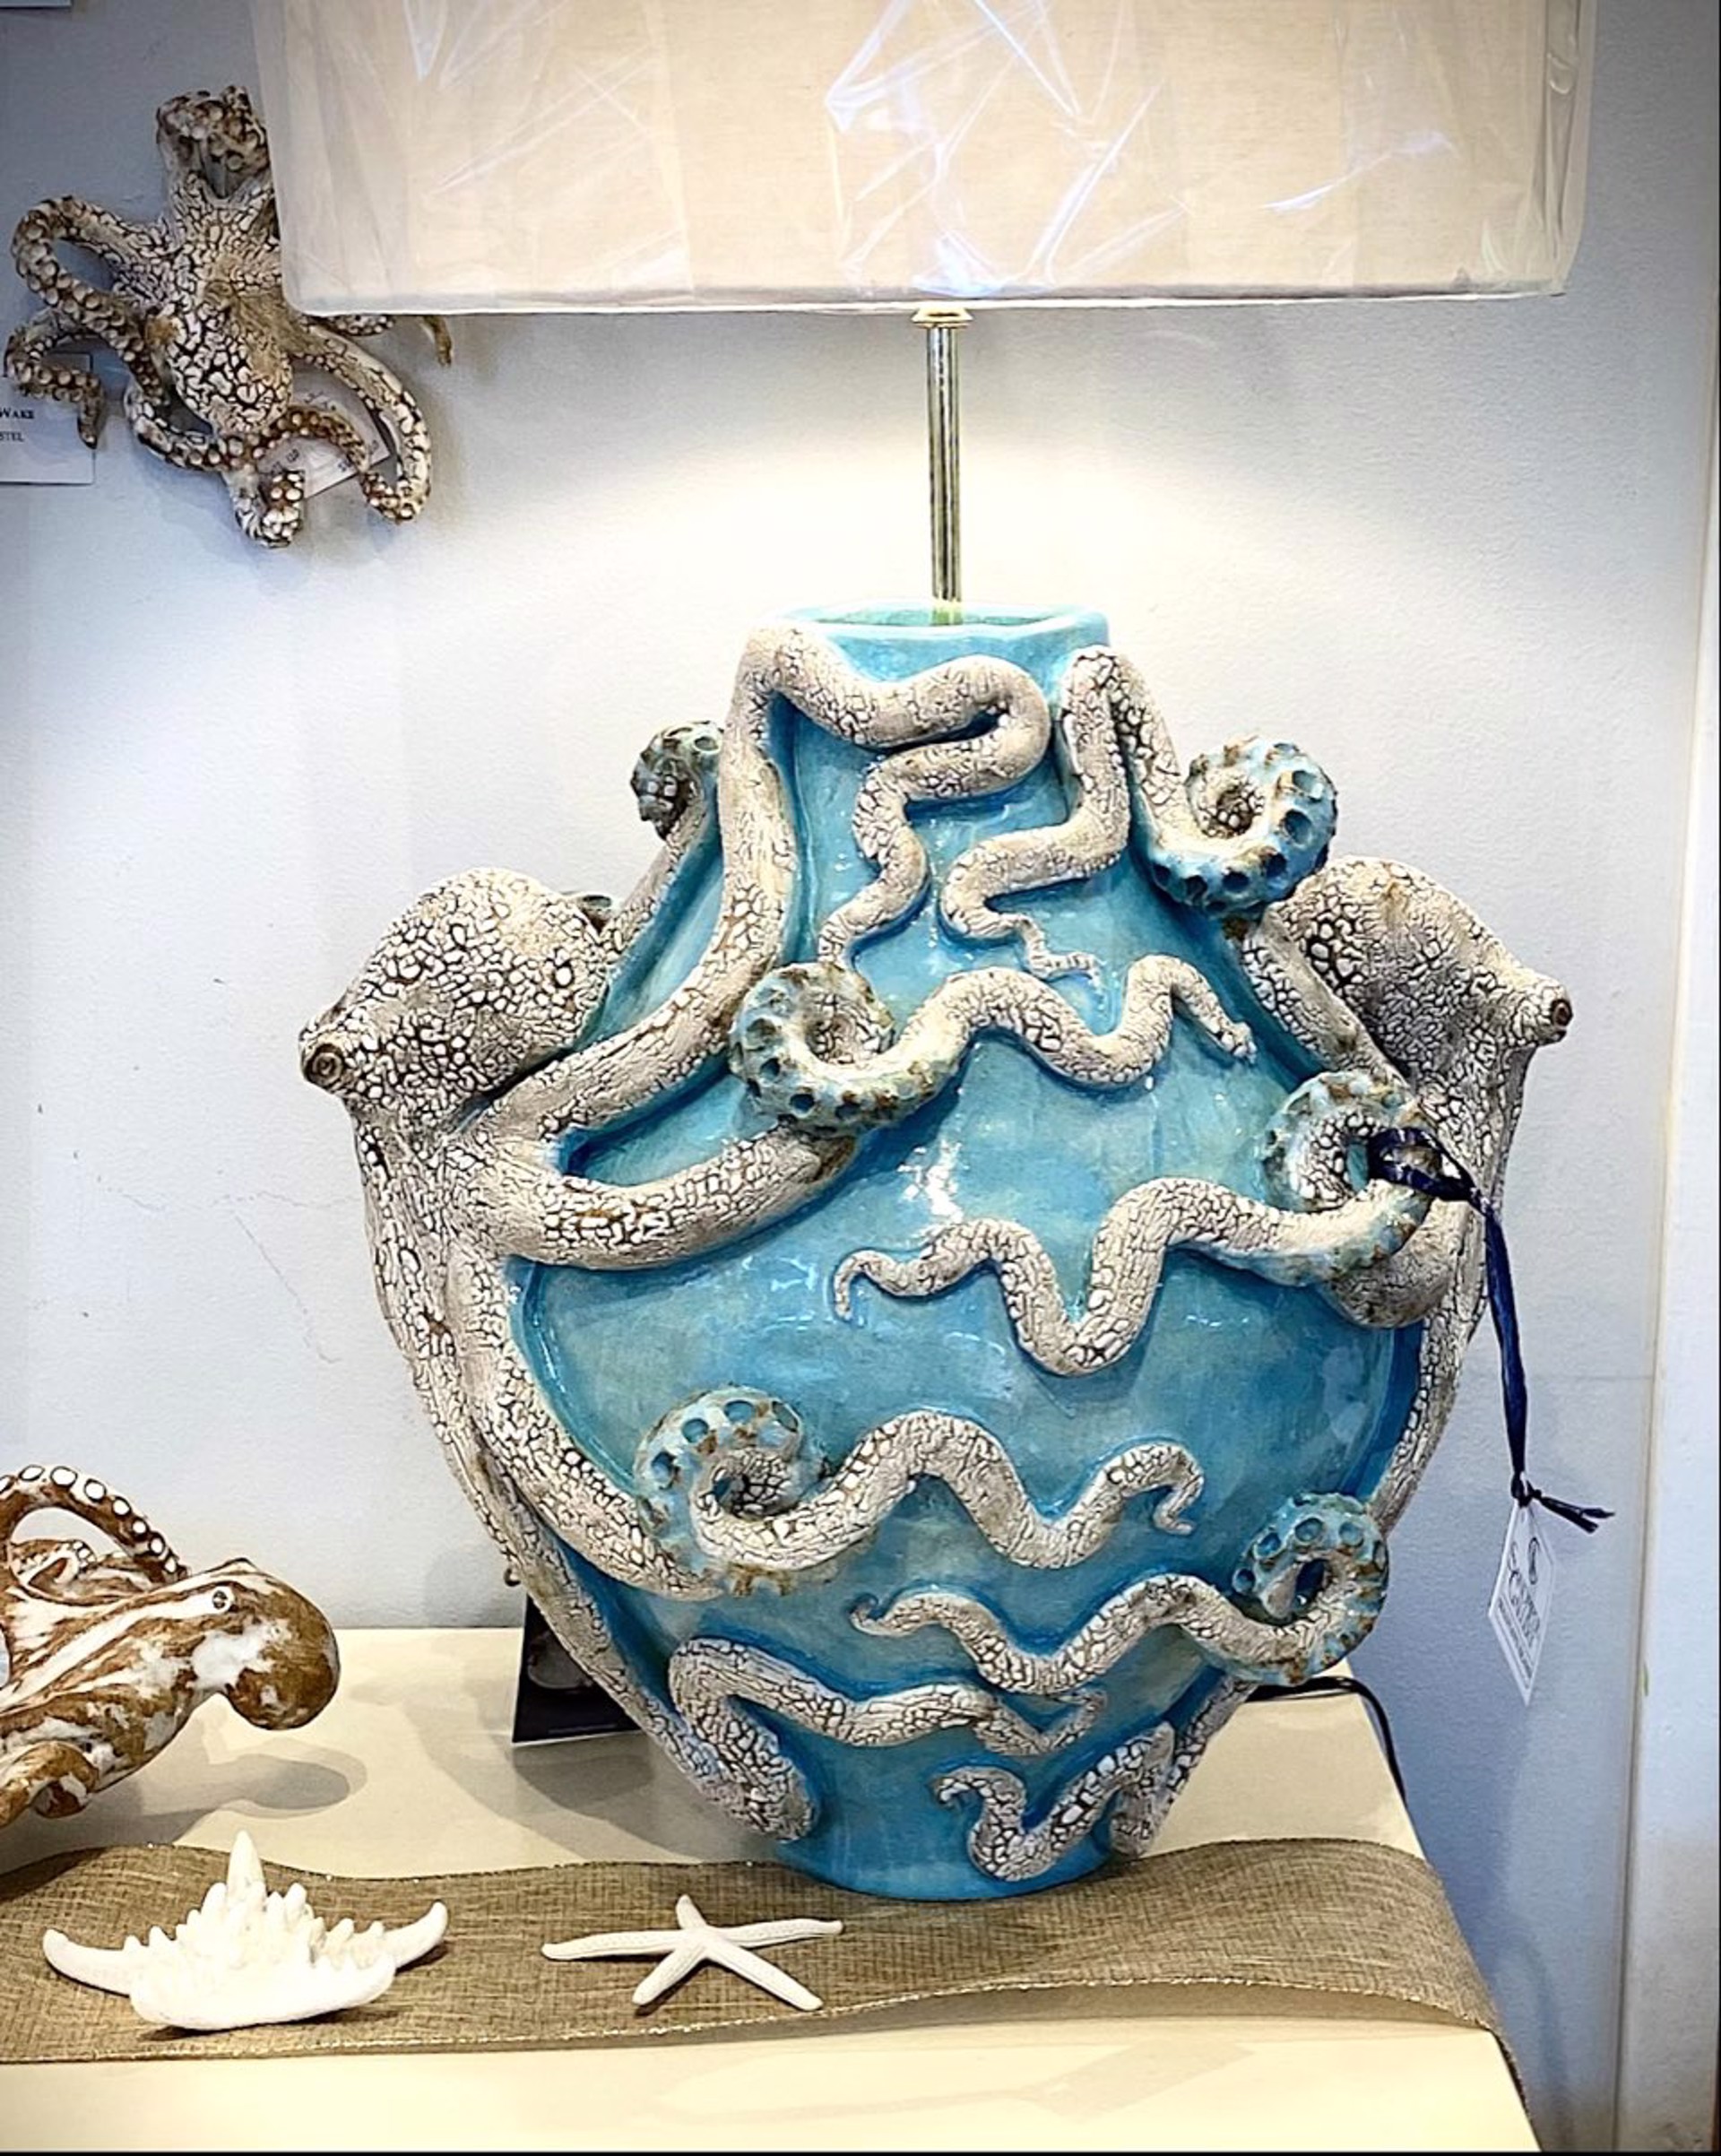 SG22-94  Octopus Lamp (Caribbean Blue) with shade 33”x17” by Shayne Greco